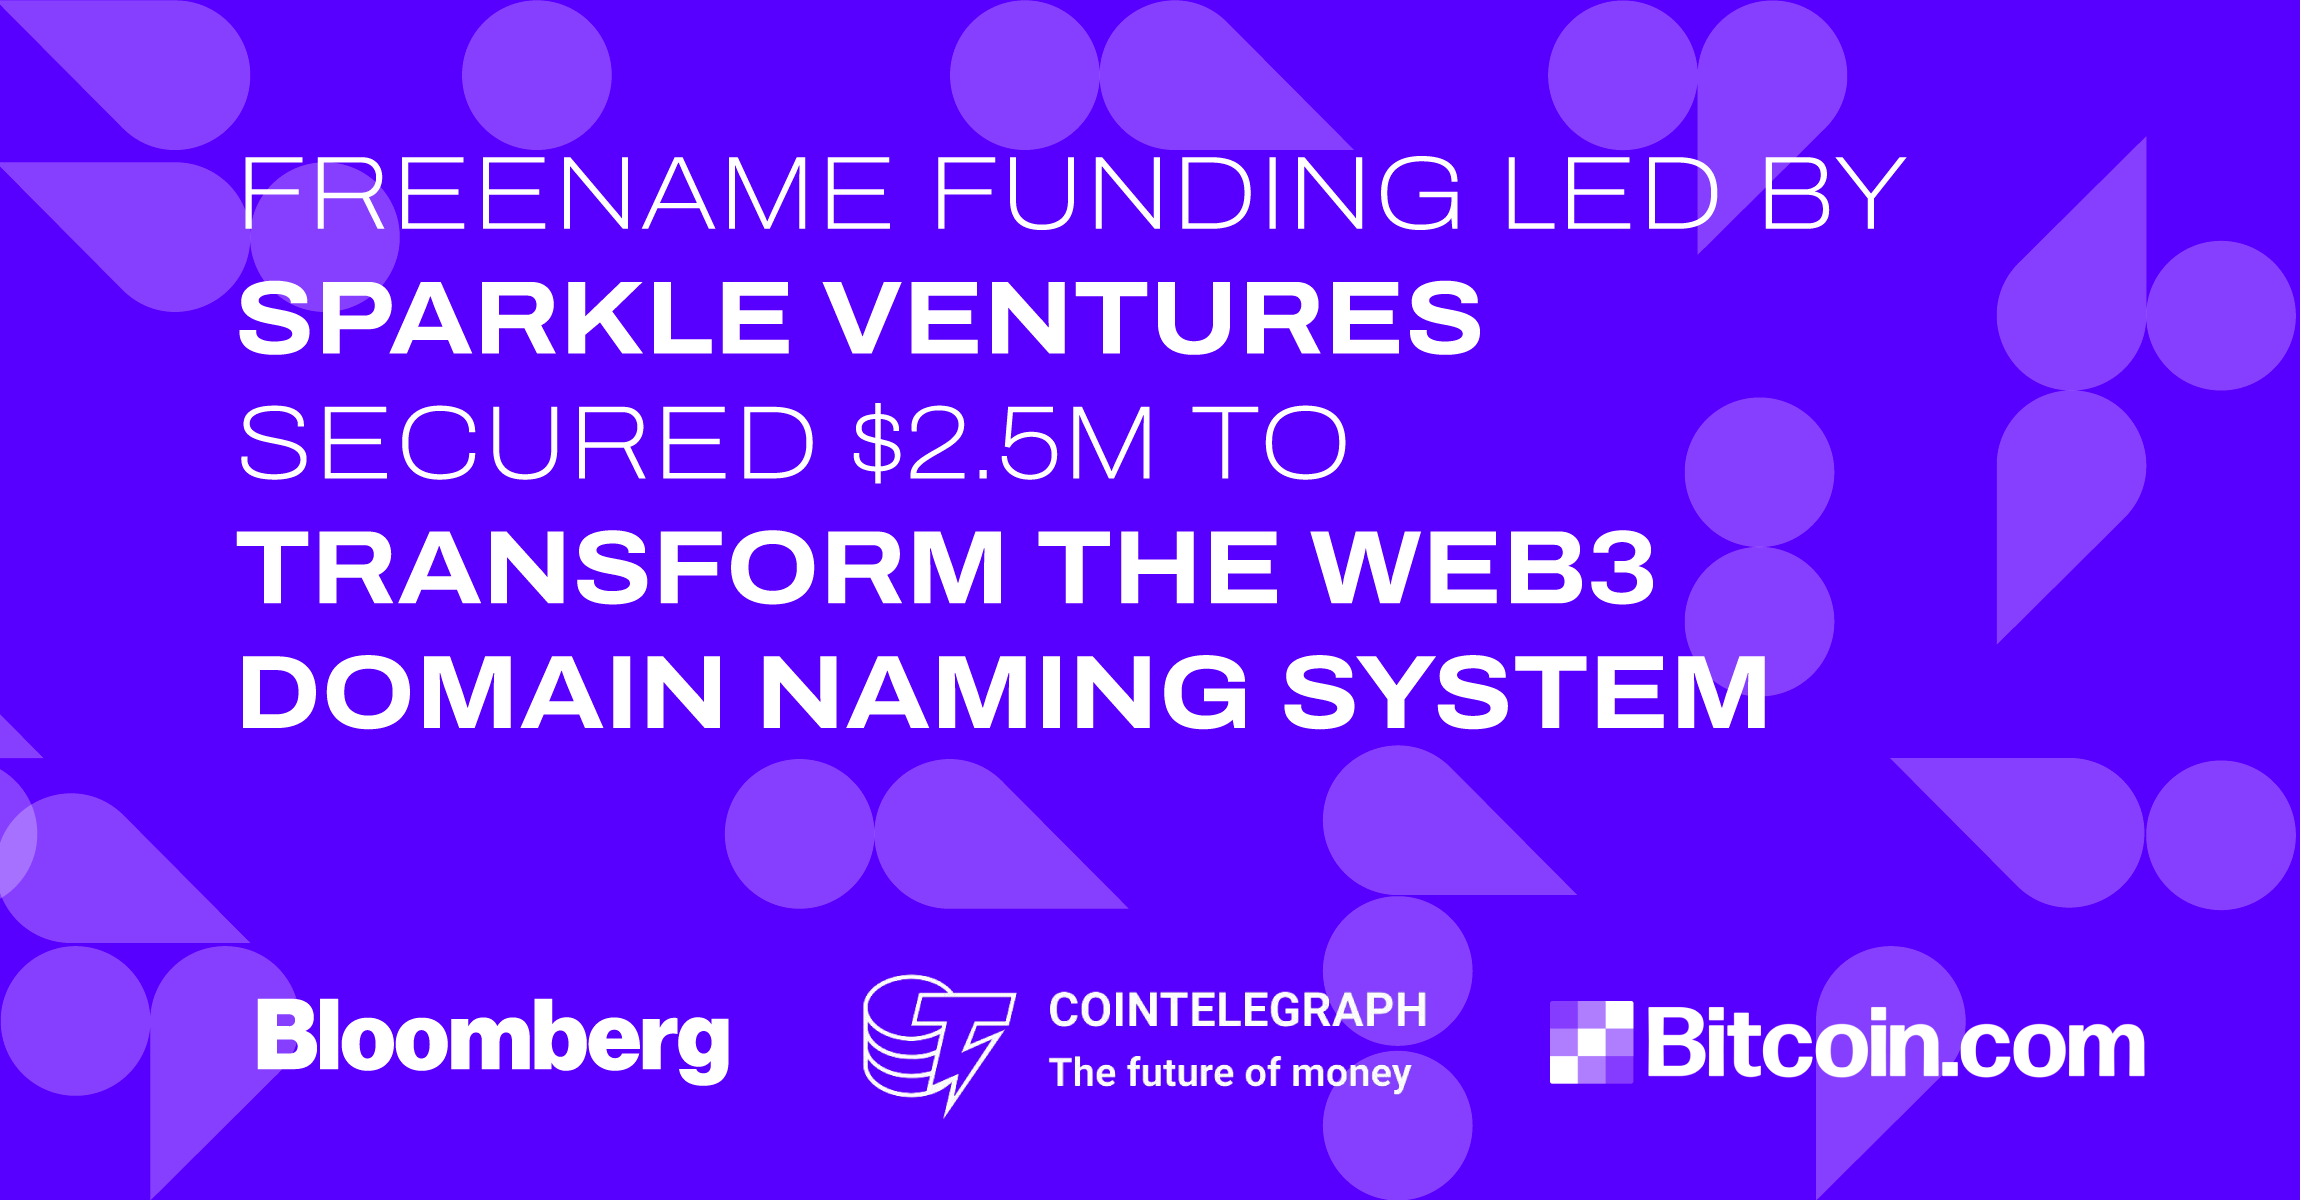 Freename funding led by Sparkle Ventures secures 2.5M to transform the web3 domain naming system